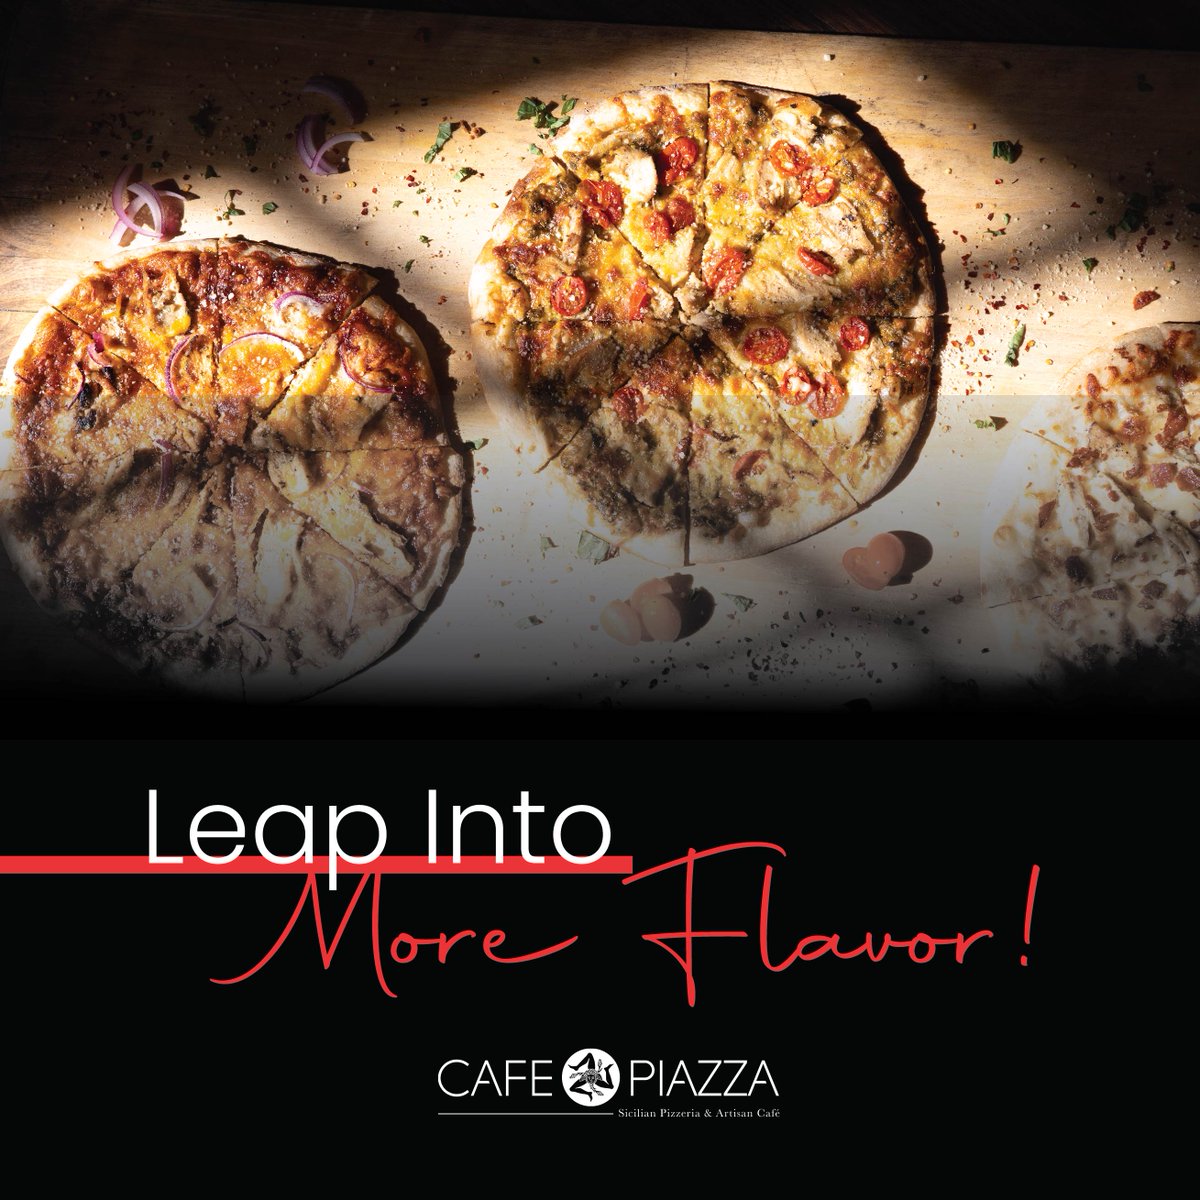 February 29th isn’t just an extra day—it's an extra chance to indulge in extraordinary food at Cafe Piazza. Treat yourself to a feast with items like our Il Vicaro Sicilian-style pie! #CafePiazzaDelights #STLEats #LeapYear